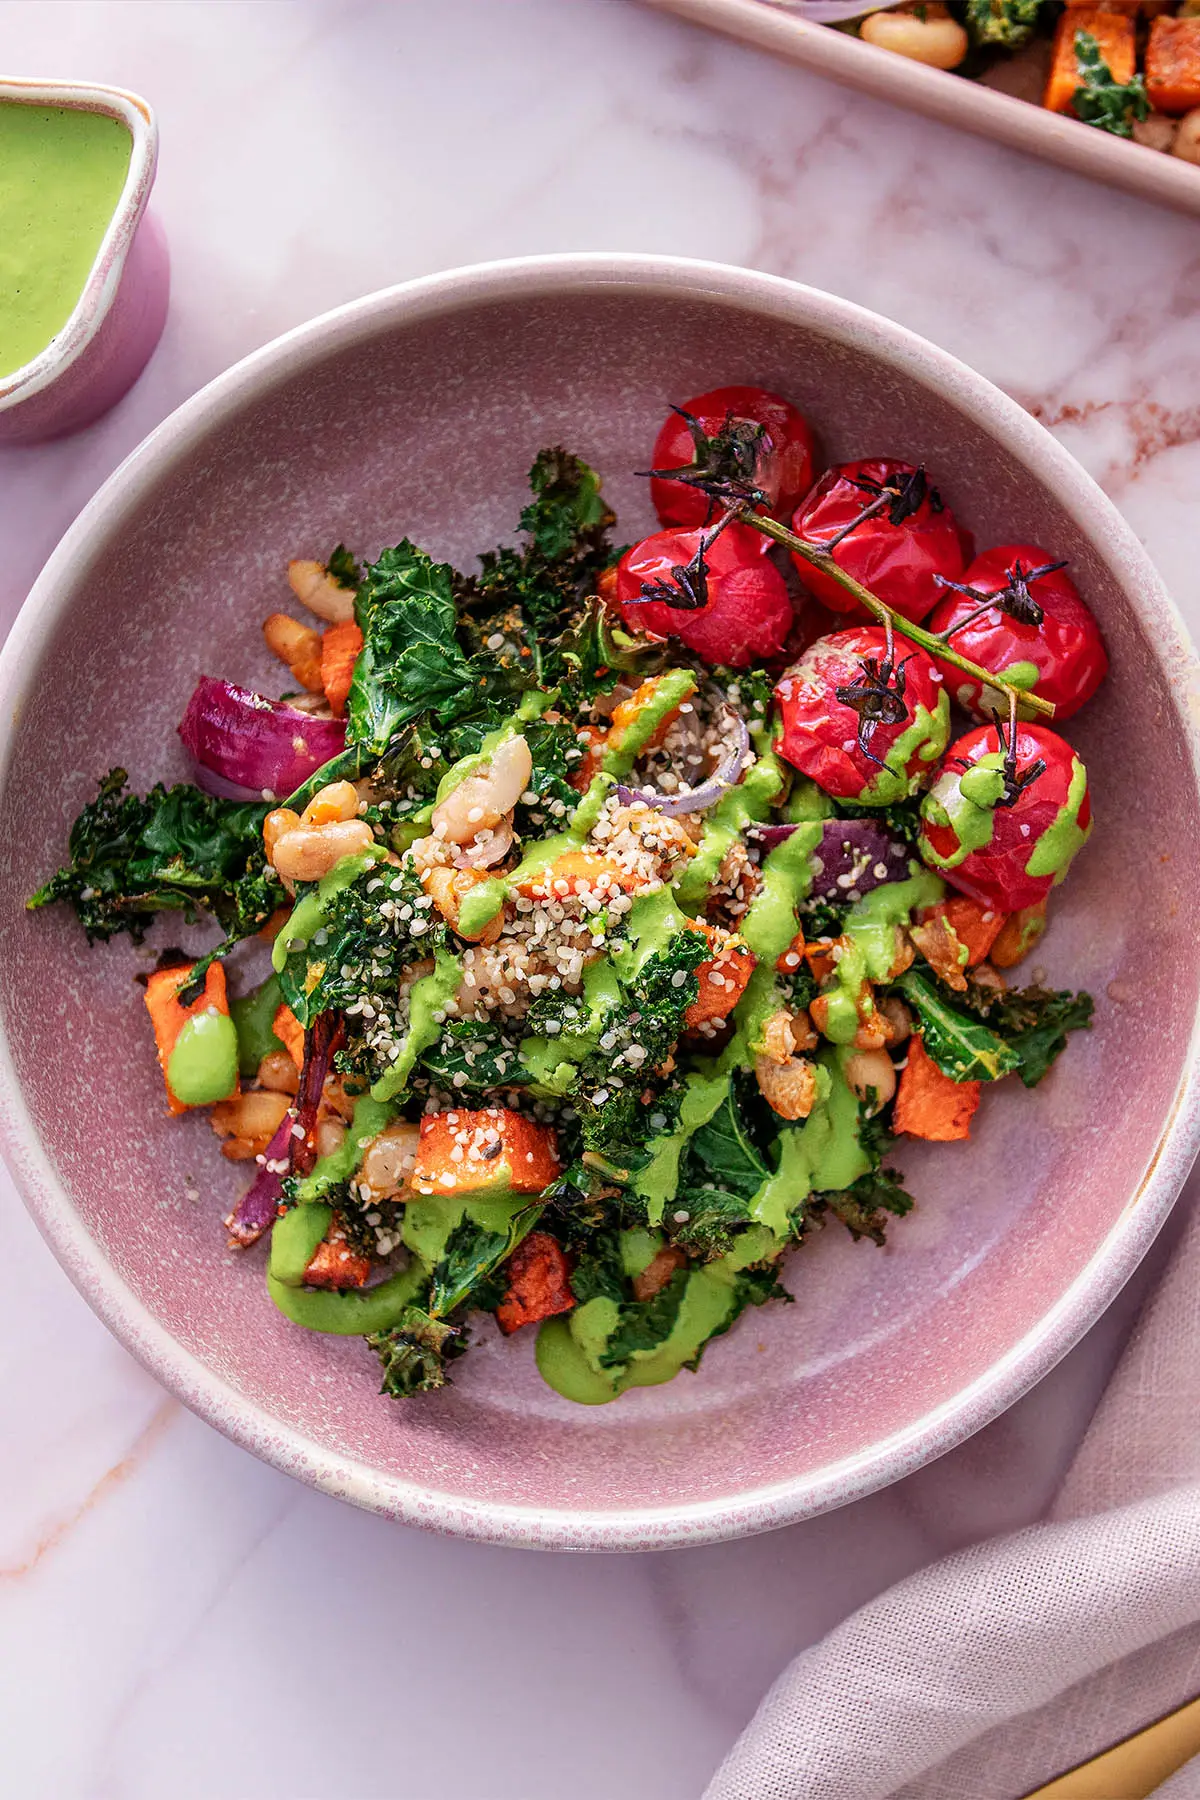 A vibrant, nourishing plant-based bowl as featured in The Ultimate Plant-Based Cookbook by Sarah Cobacho